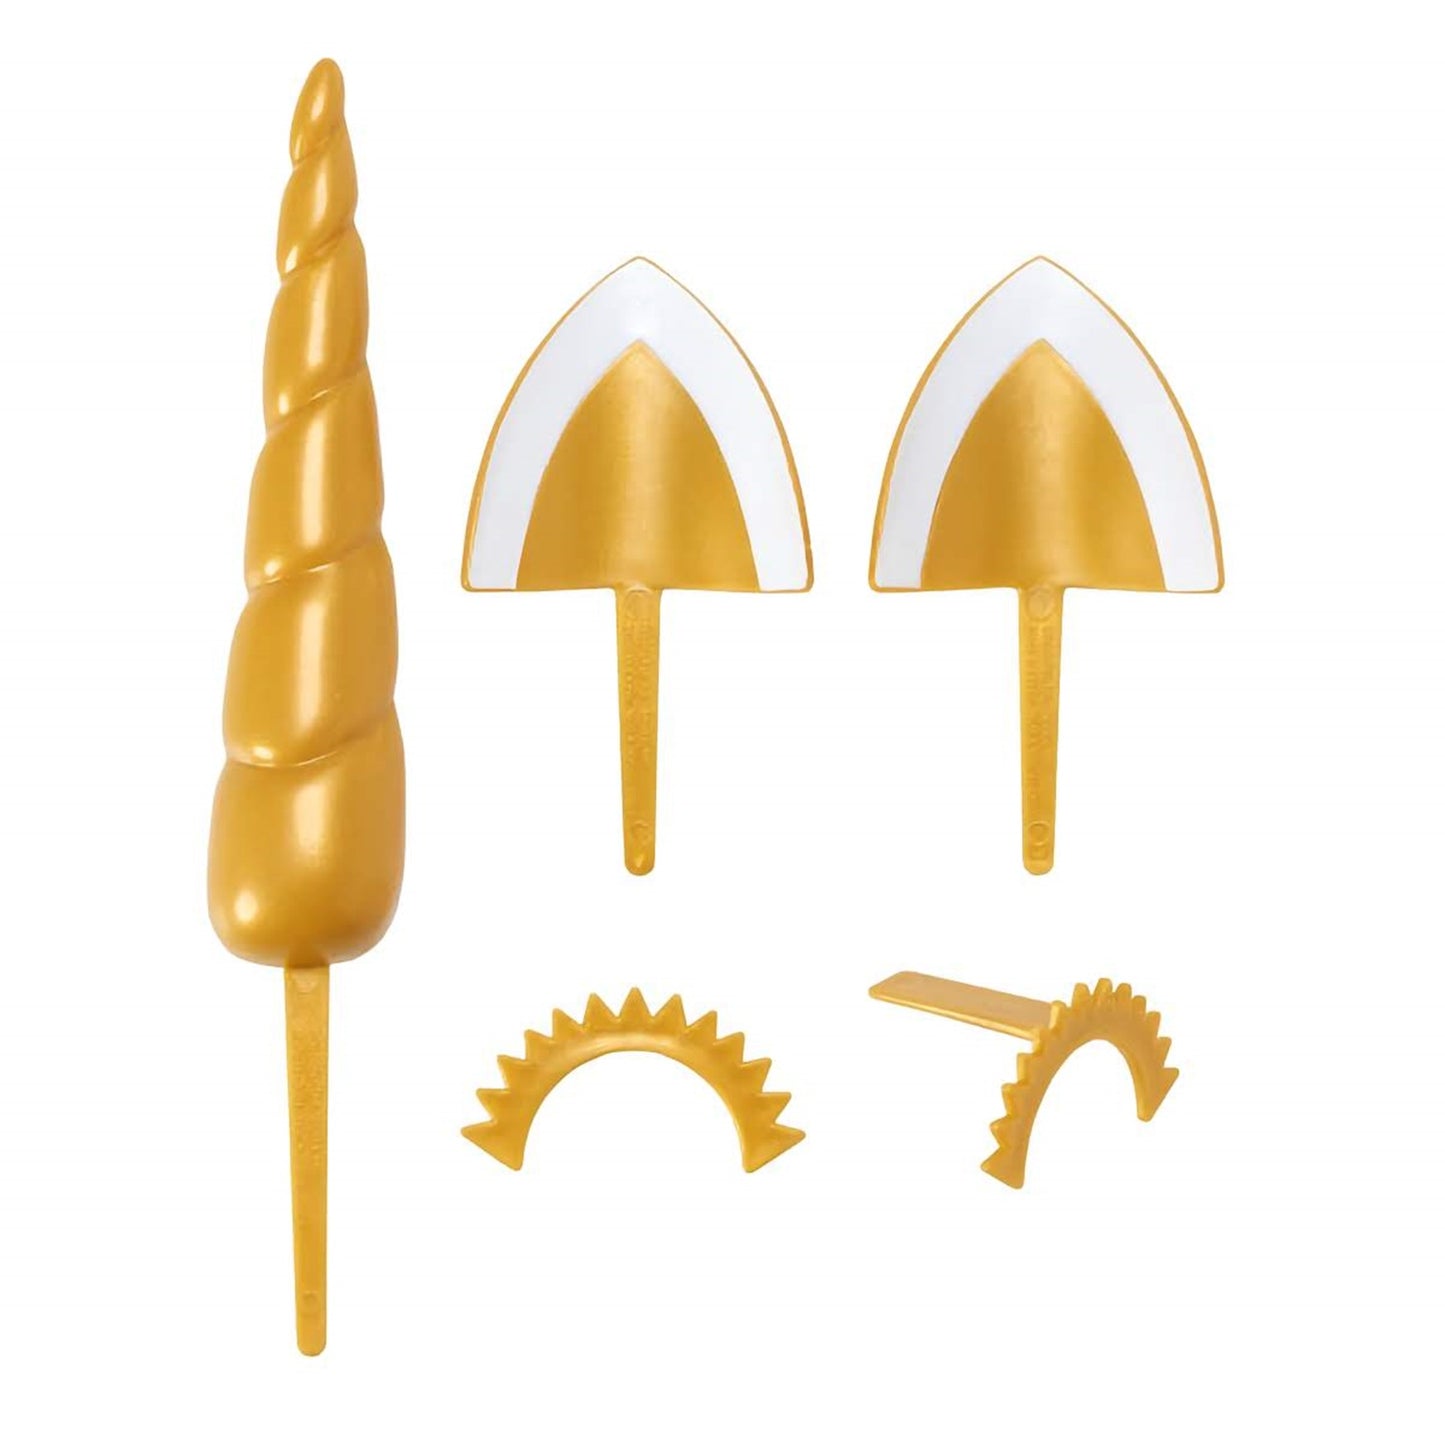 Complete unicorn cake decorating kit including golden horn and ears, designed to transform any cake into a mythical masterpiece, from Lynn's Cake, Candy, and Chocolate Supplies.